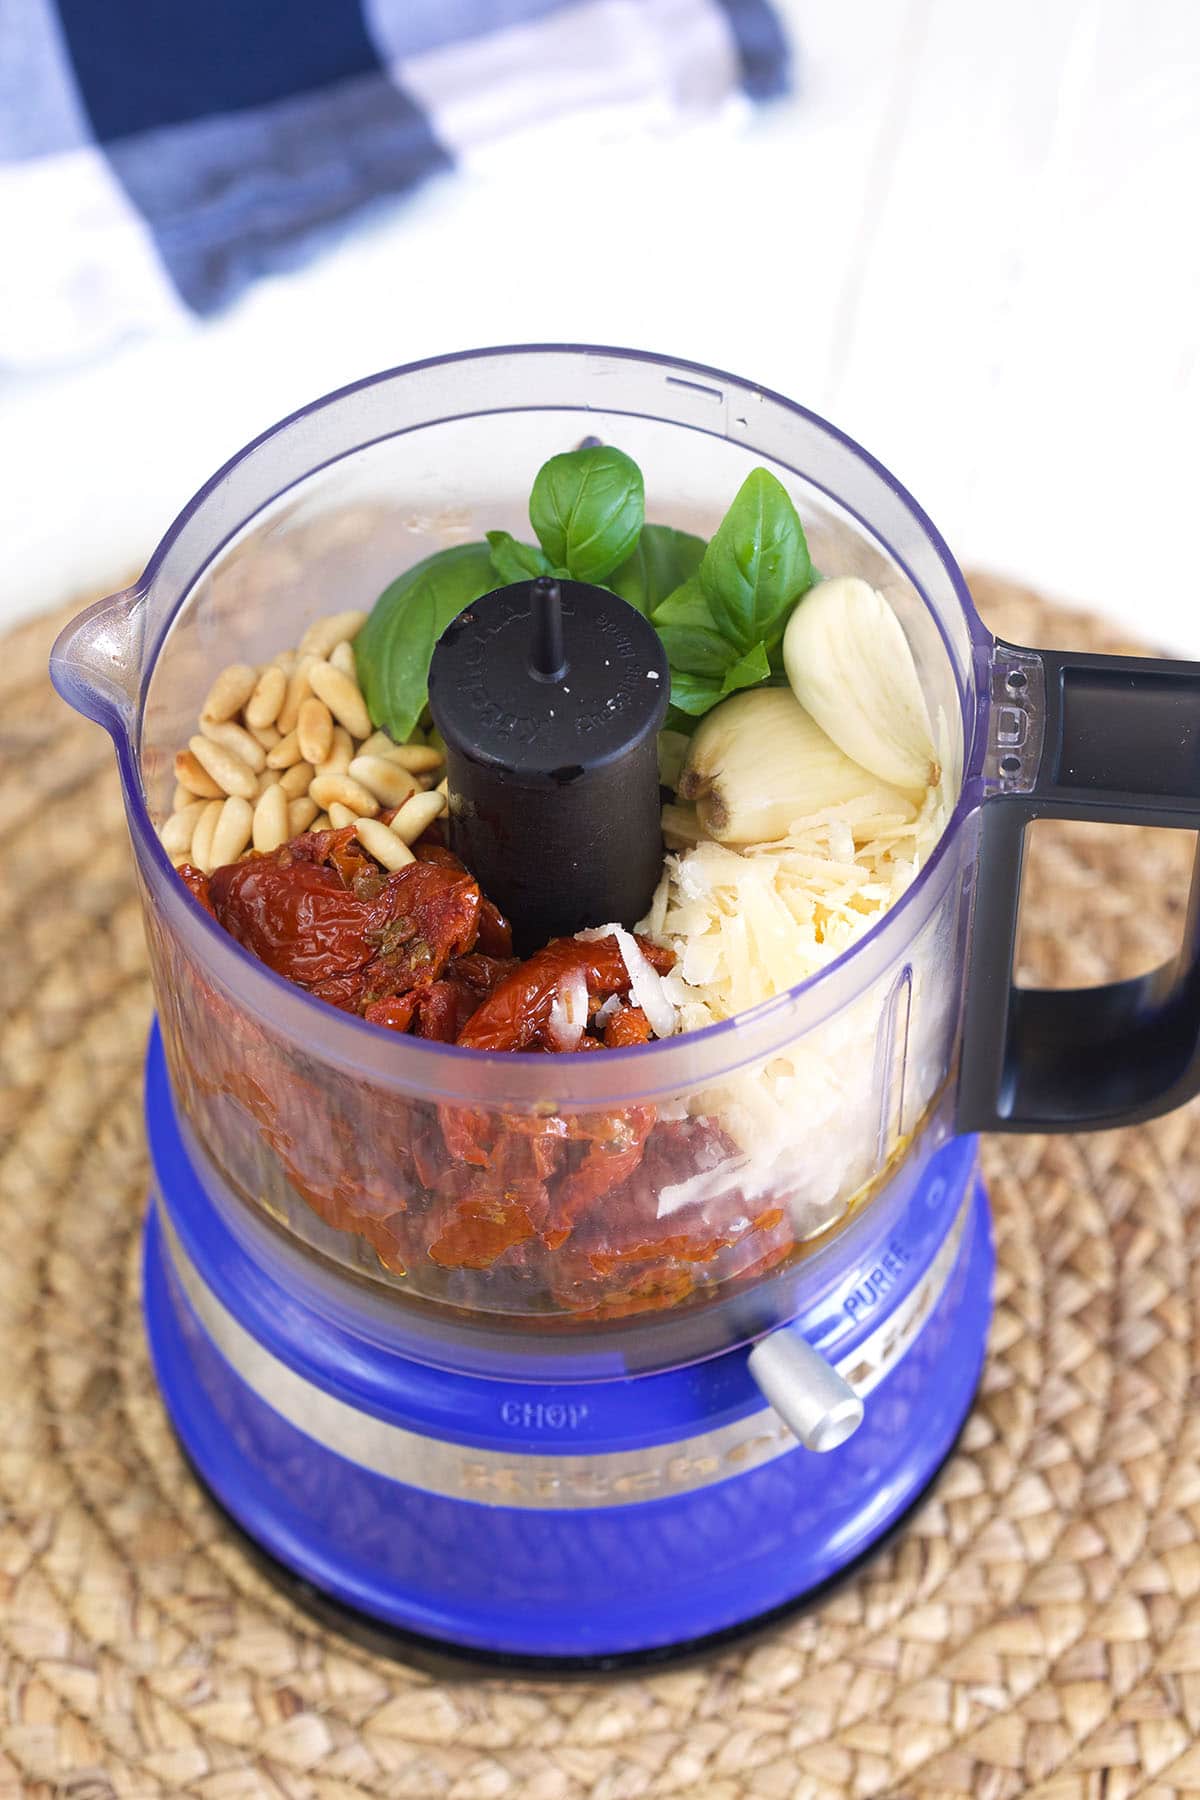 The ingredients for pesto are placed in a food processor.